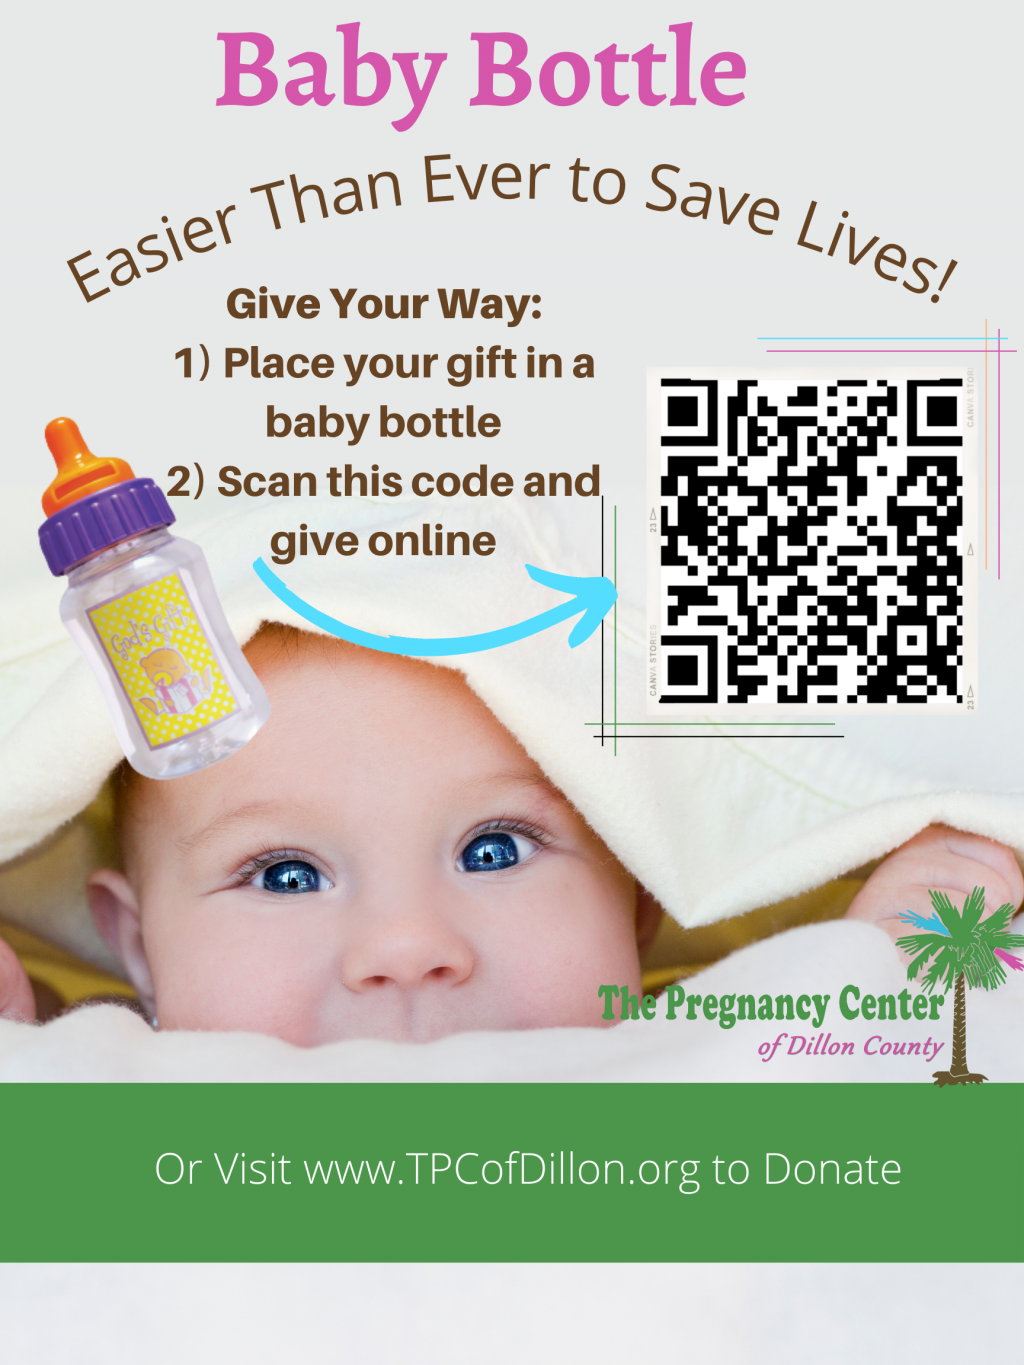 image-922371-Baby_Bottle_Campaign_2-16790.w640.png